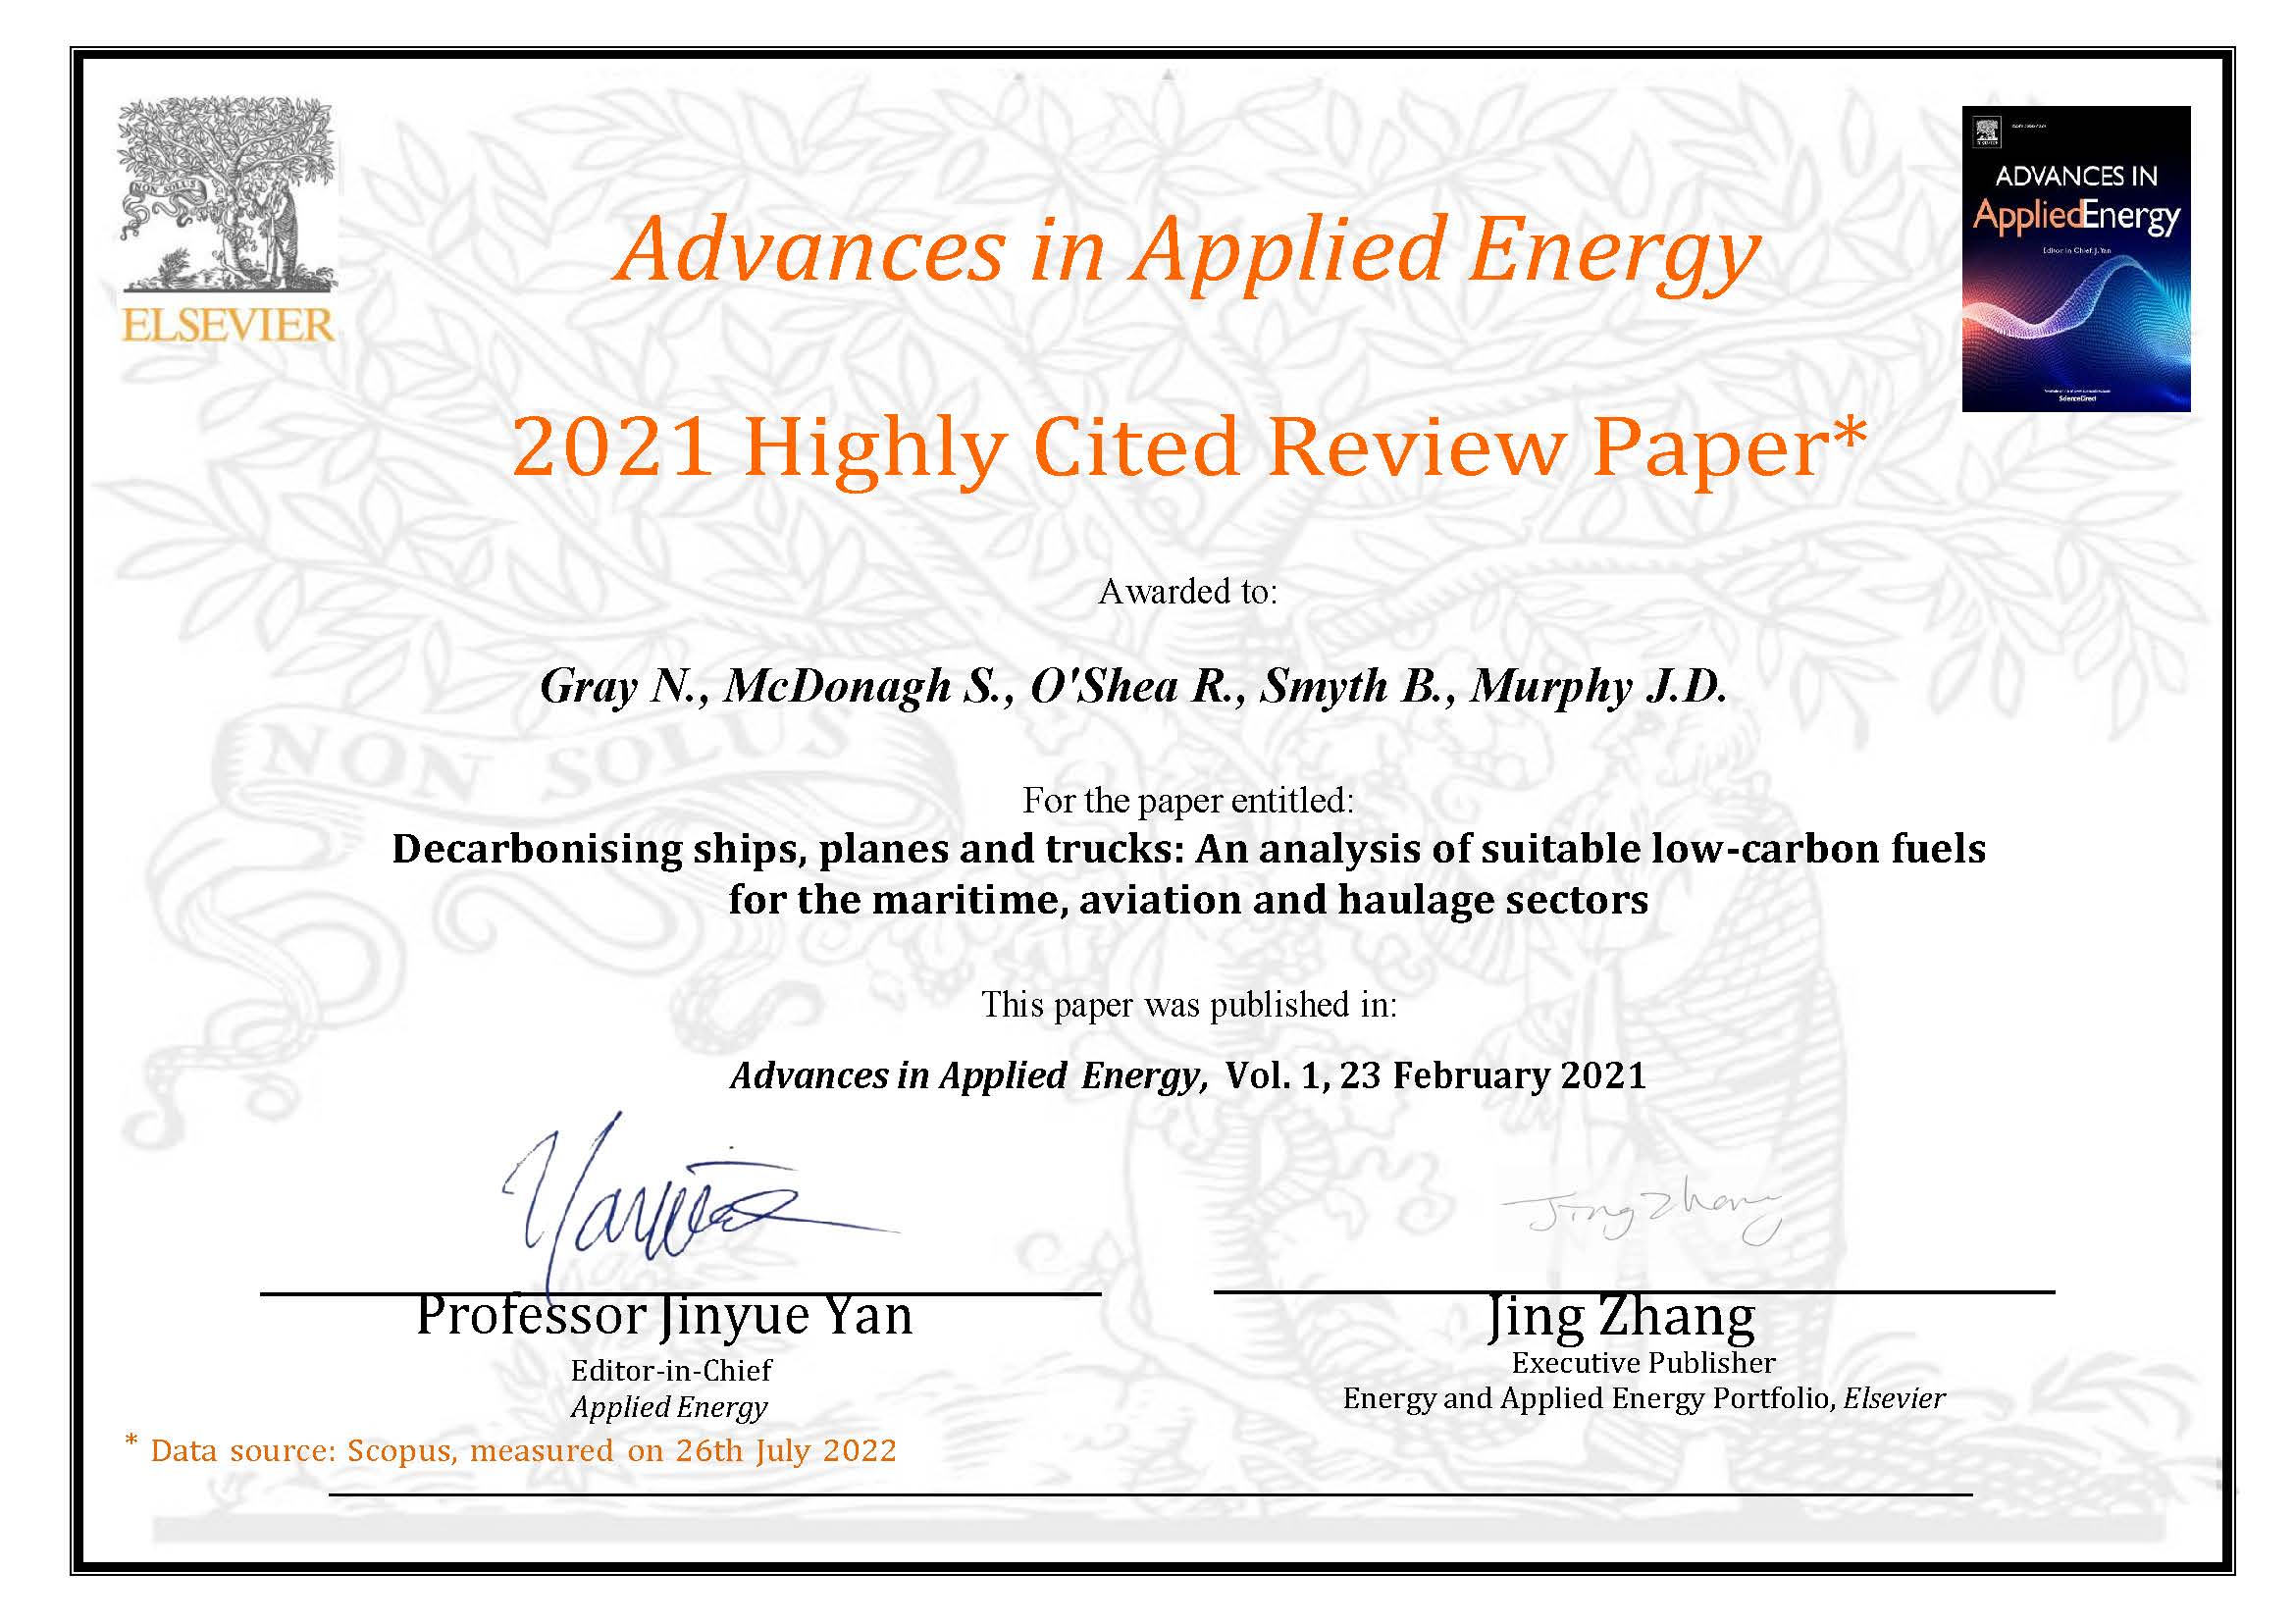 HIGHLY CITED PAPERS (2021) AWARDS by the Journal, ADVANCES IN APPLIED ENERGY